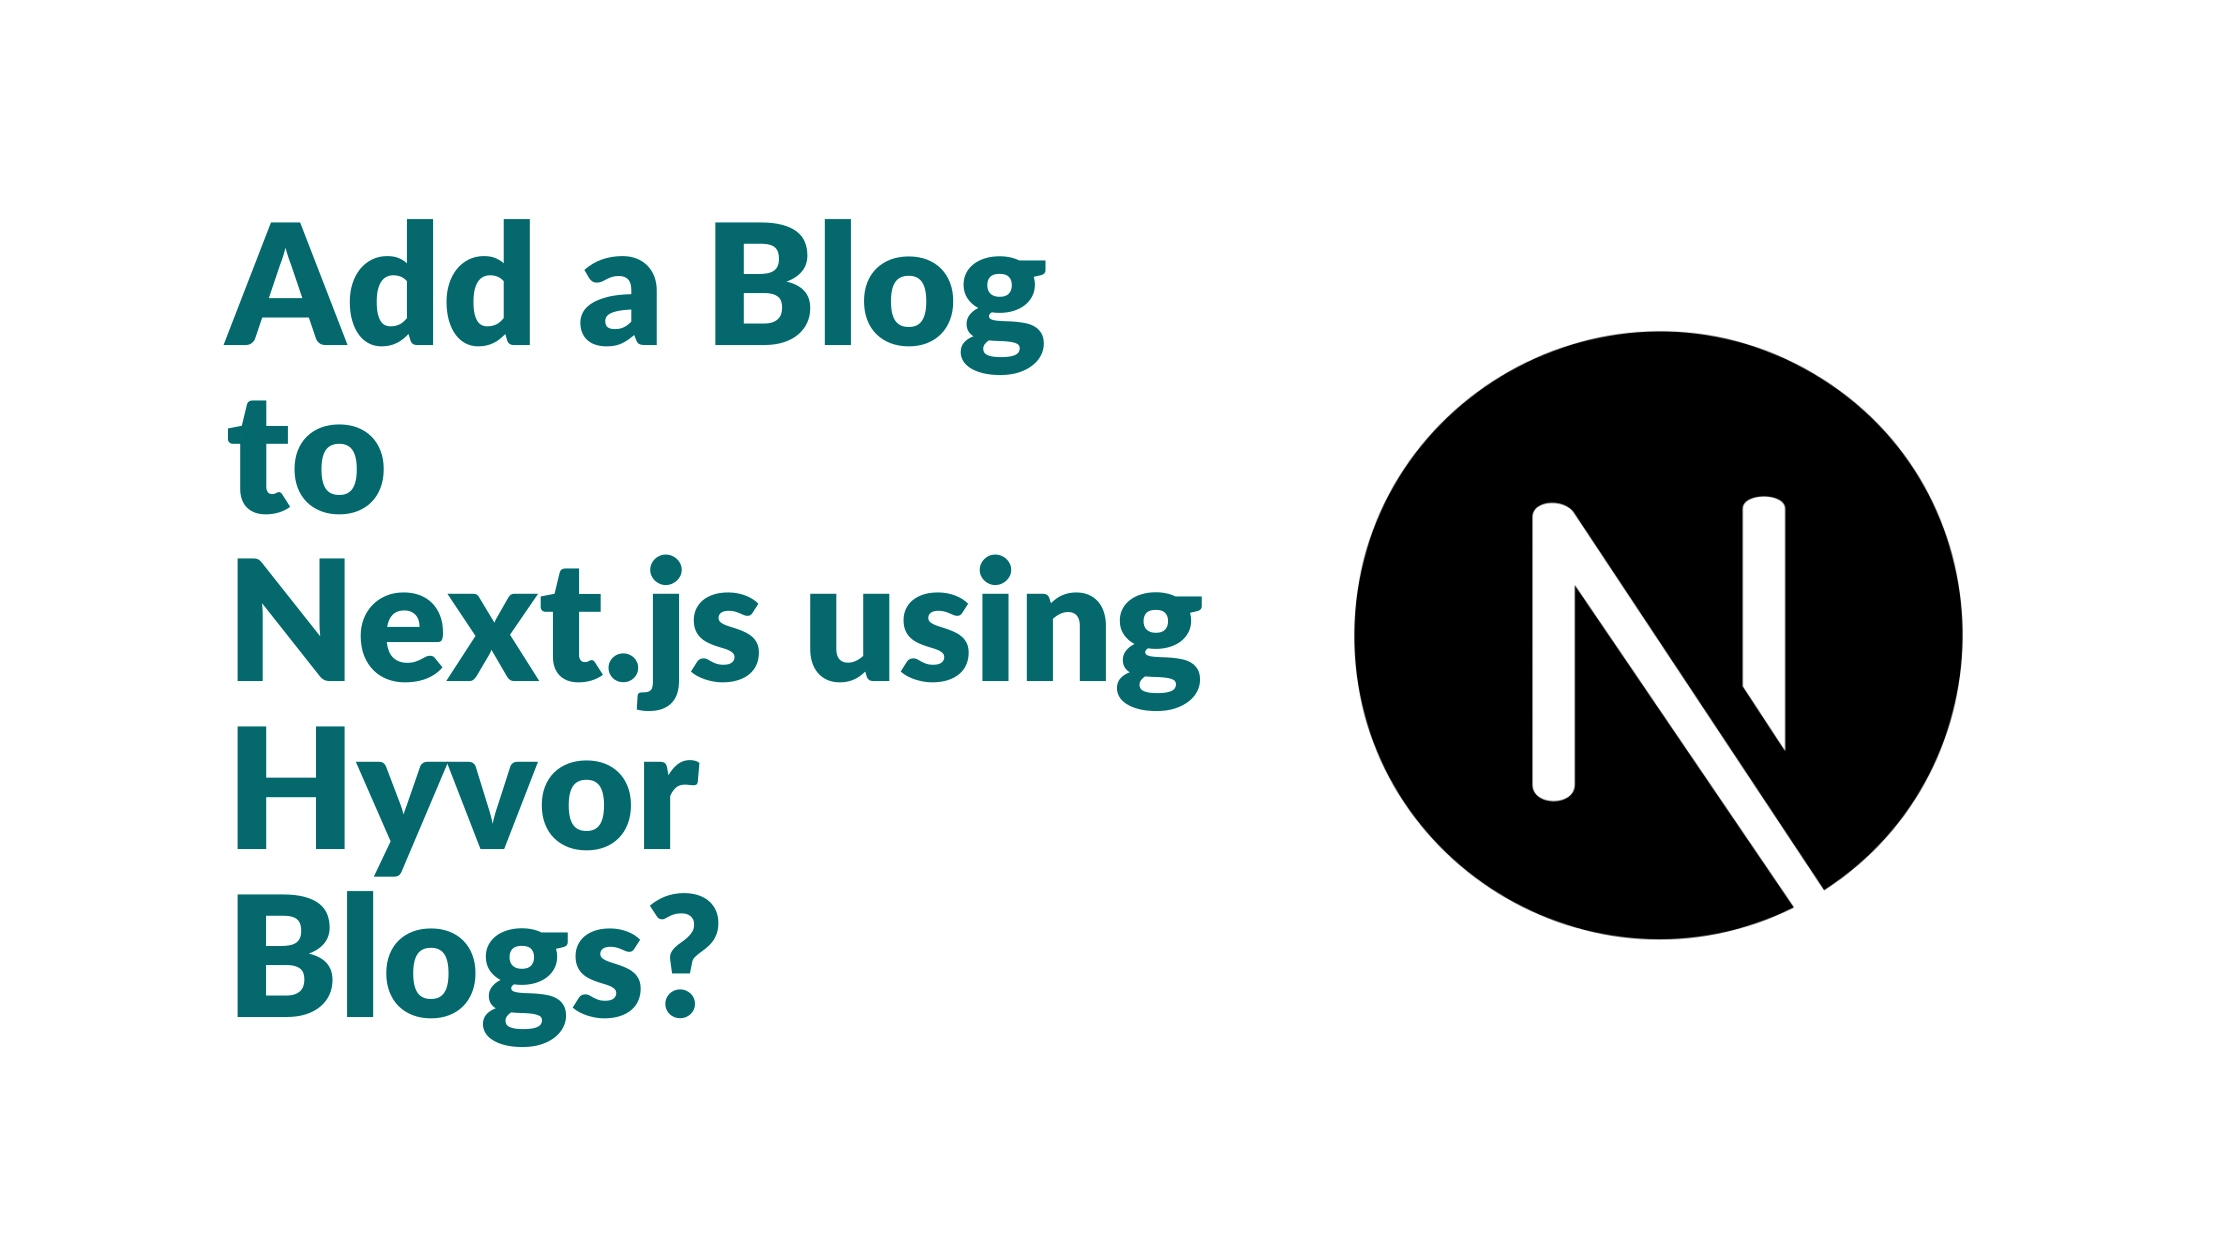 How to add a blog to Next.js using Hyvor Blogs?